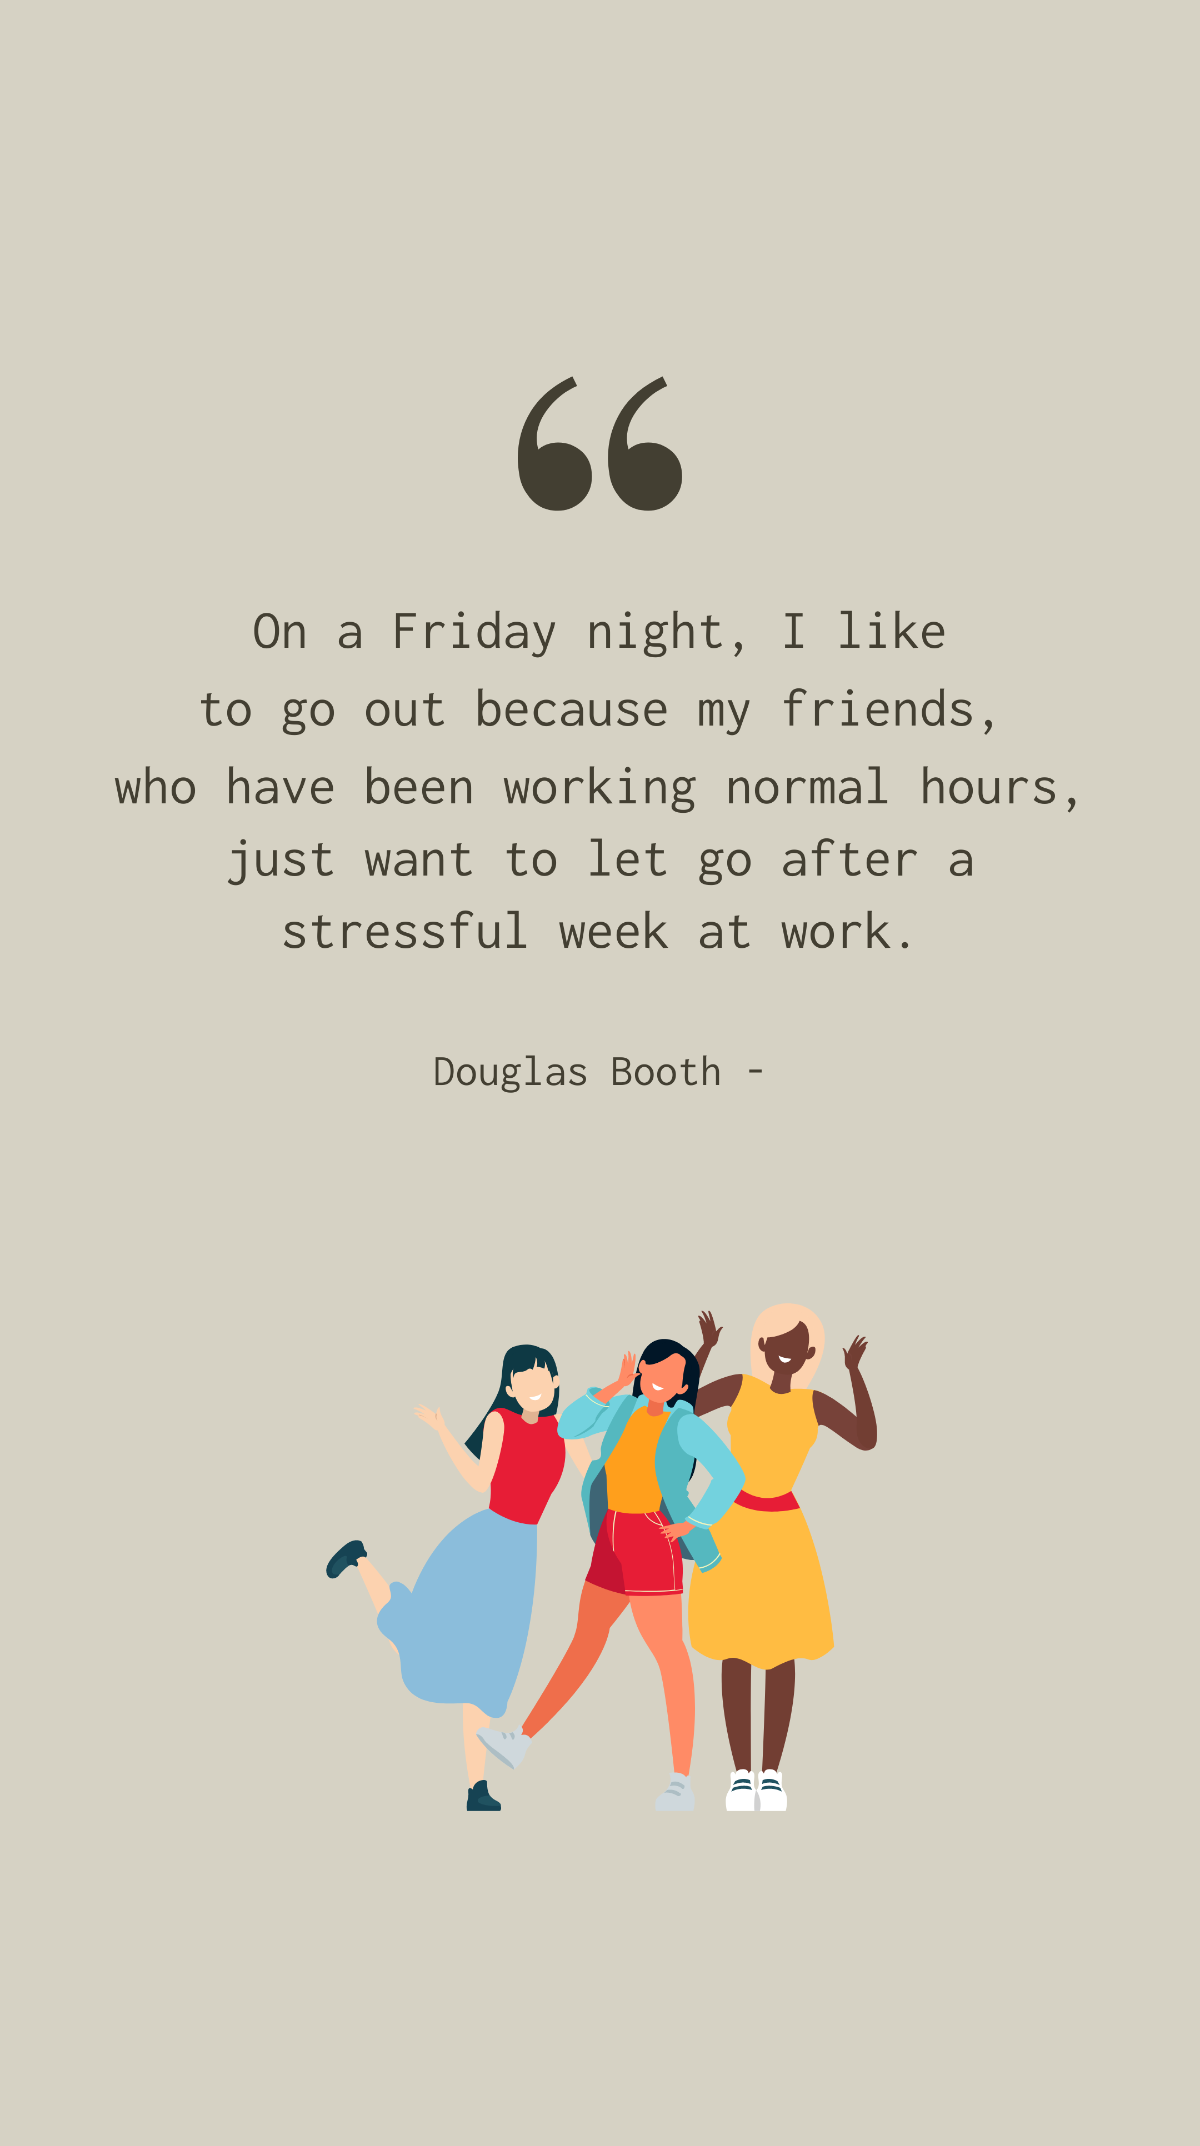 Free Douglas Booth - On a Friday night, I like to go out because my friends, who have been working normal hours, just want to let go after a stressful week at work. Template